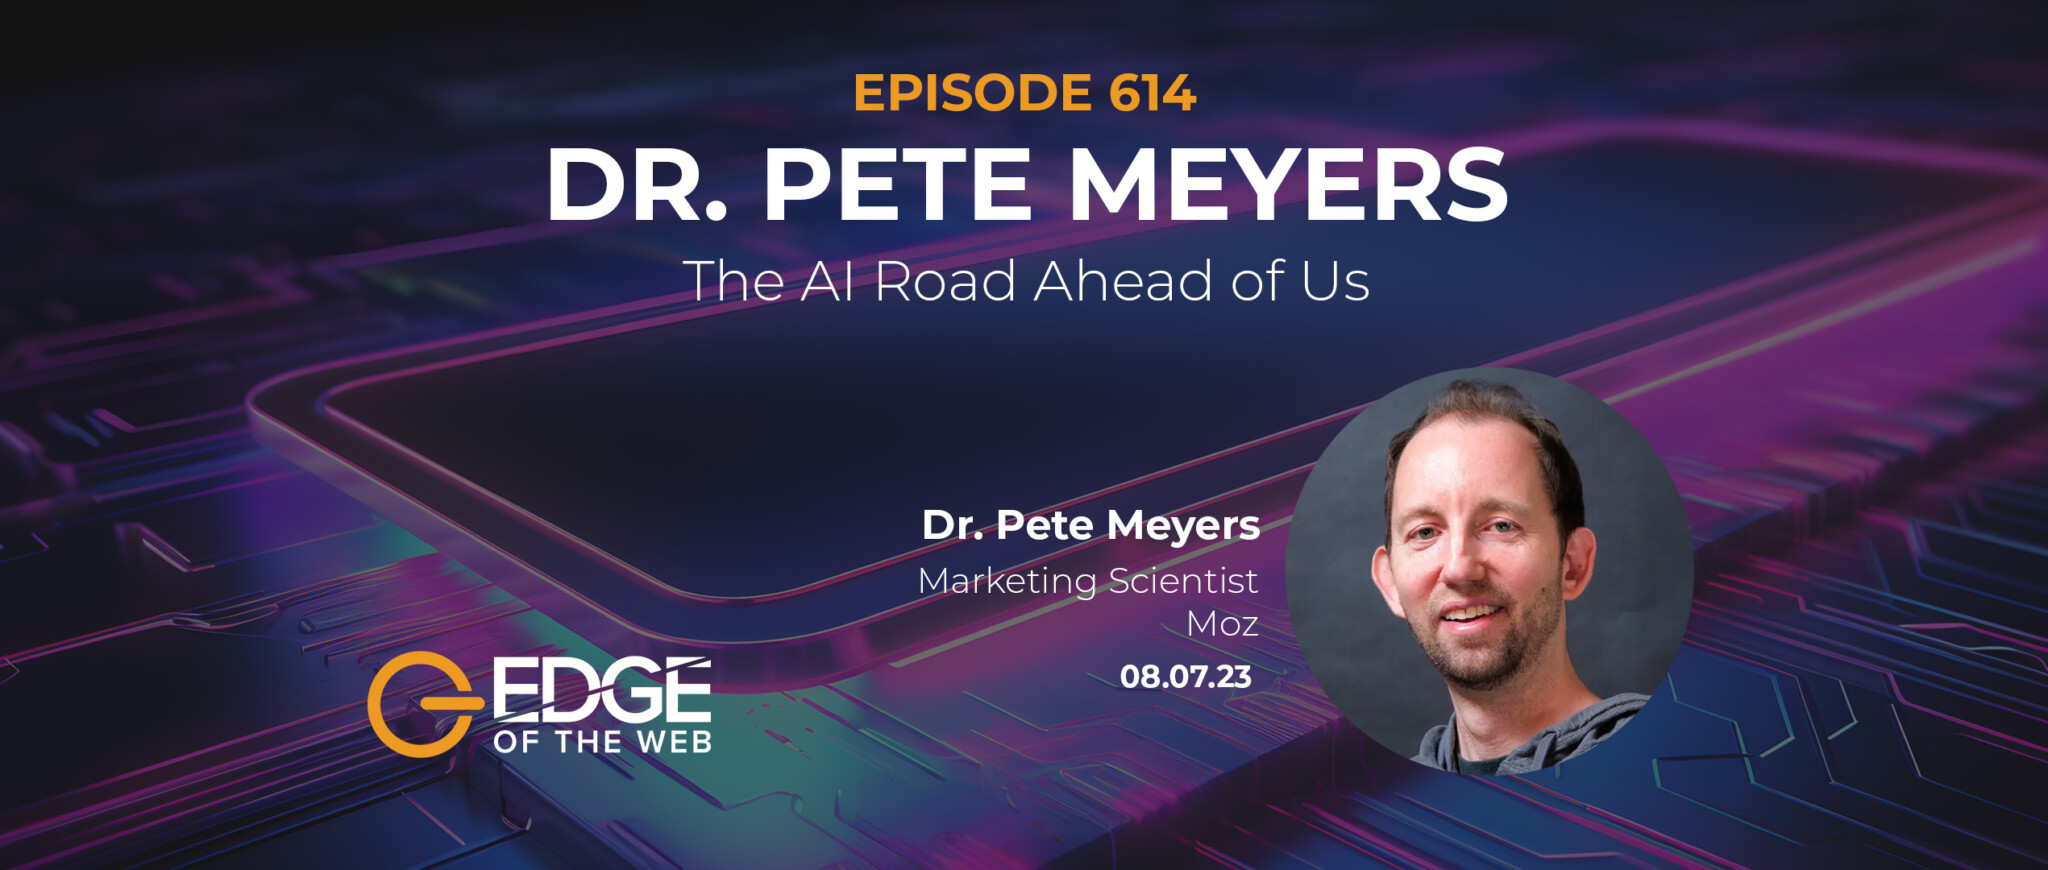 Dr. Pete Meyers - EDGE Episode 614 Featured Image